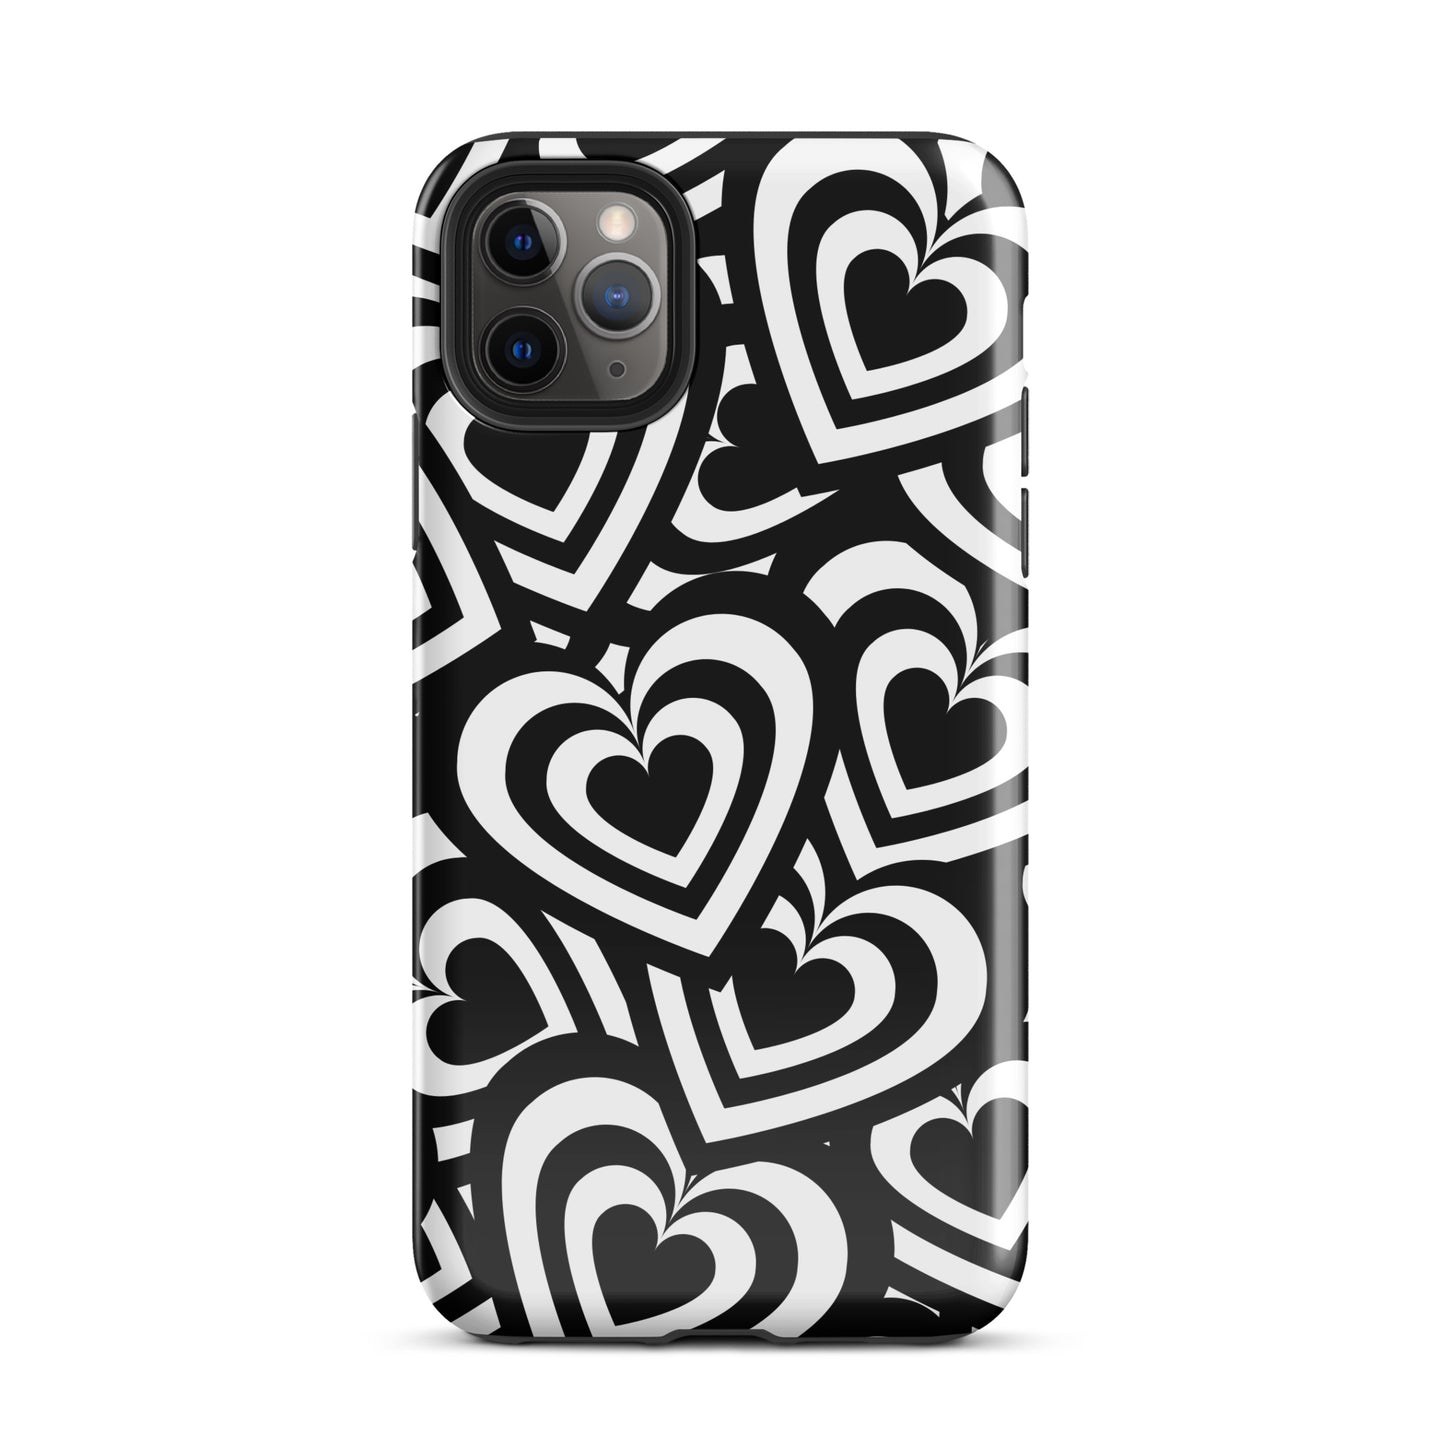 Black & White Hearts iPhone Case iPhone 11 Pro Max Glossy